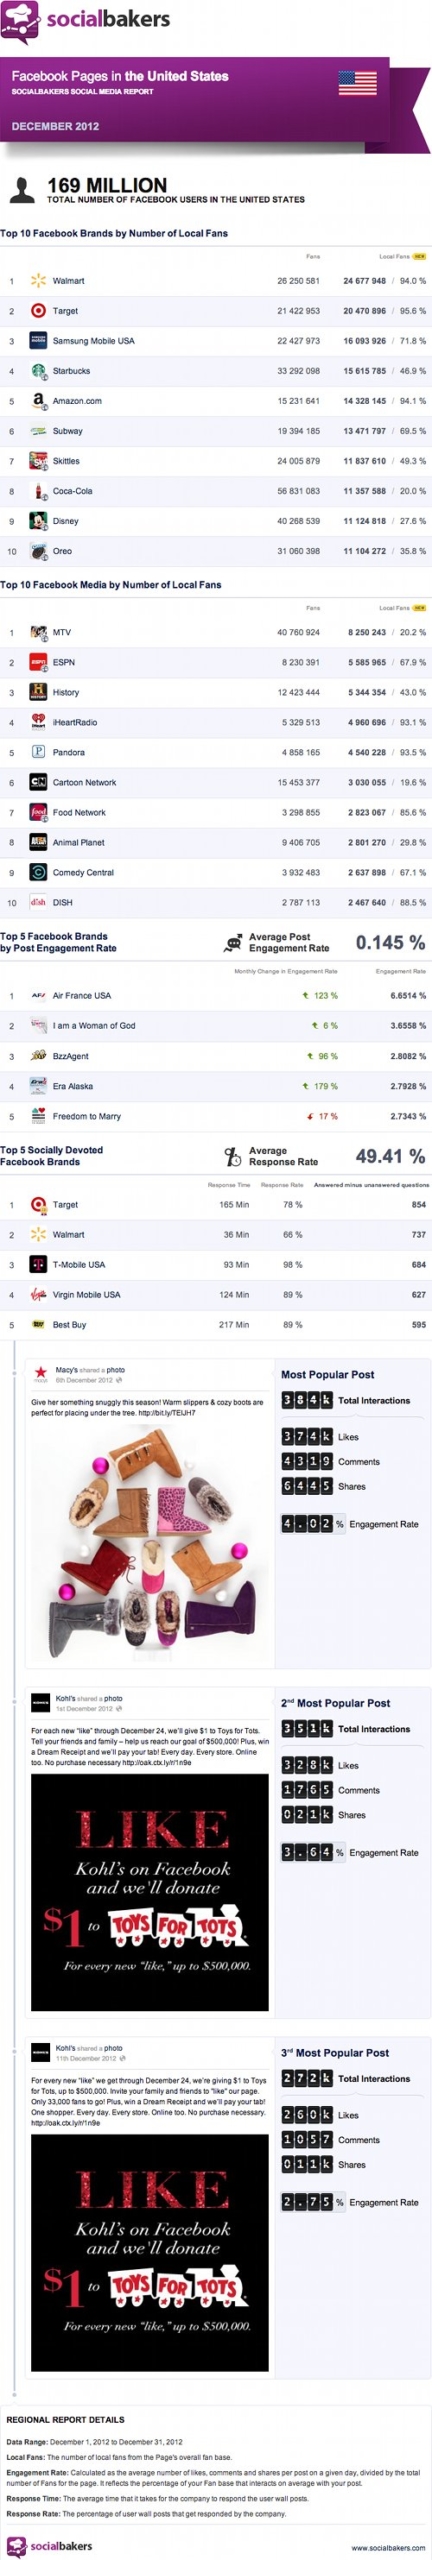 Top Facebook Pages in the US, Dec ’12